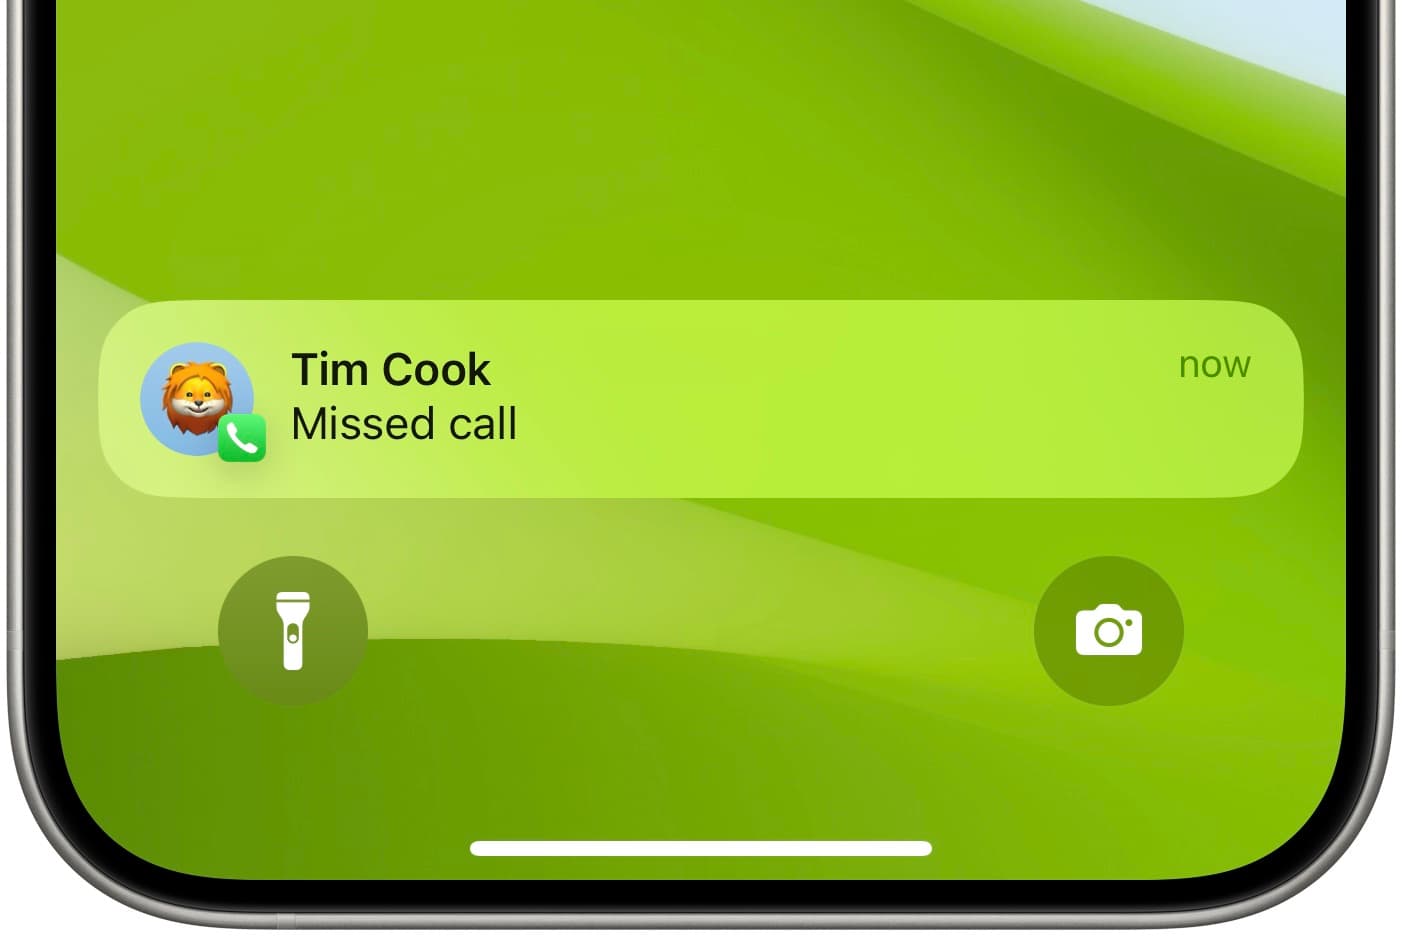 Missed call from Tim Cook on iPhone Lock Screen